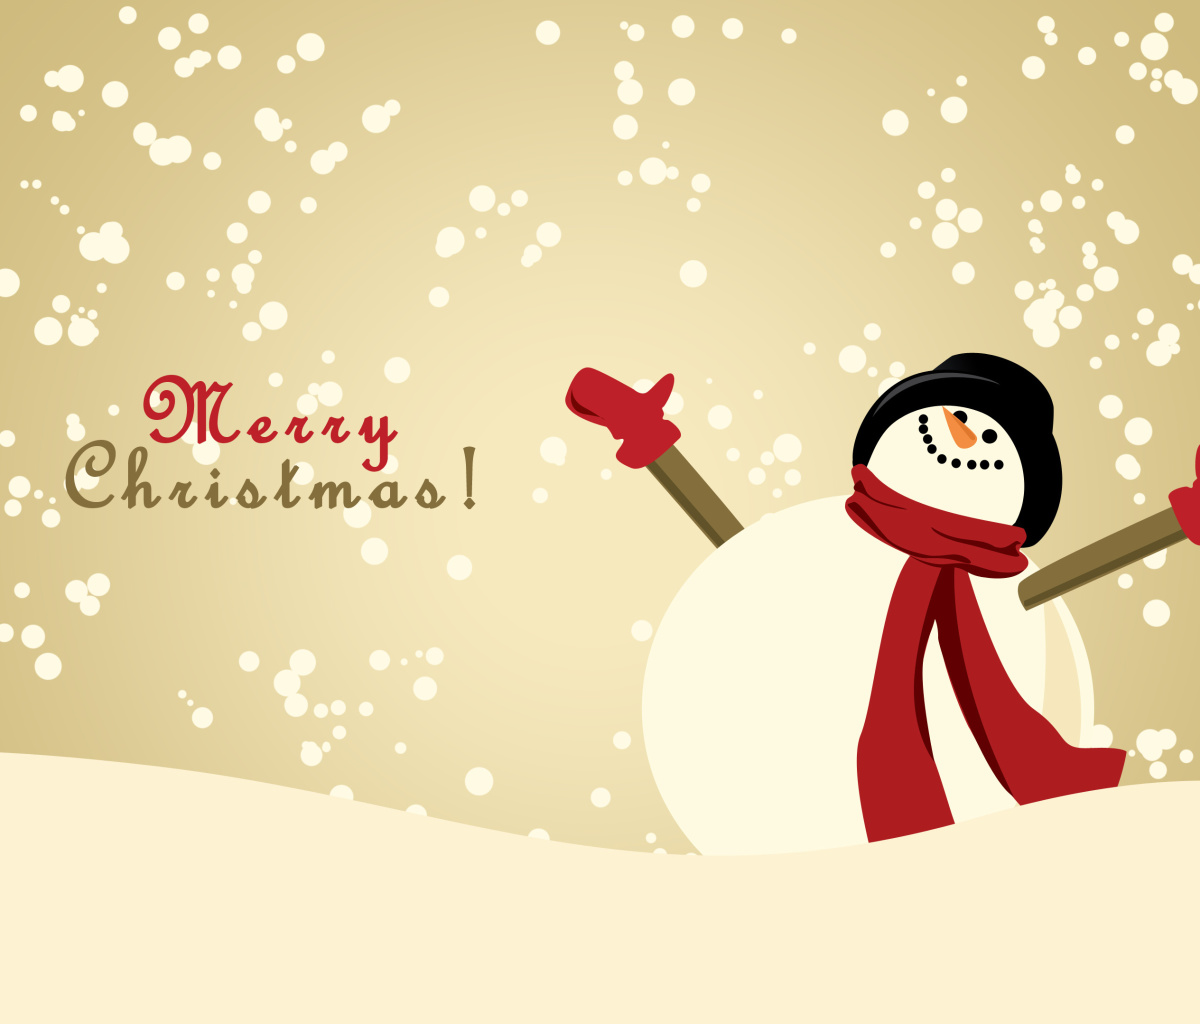 Merry Christmas Wishes from Snowman screenshot #1 1200x1024